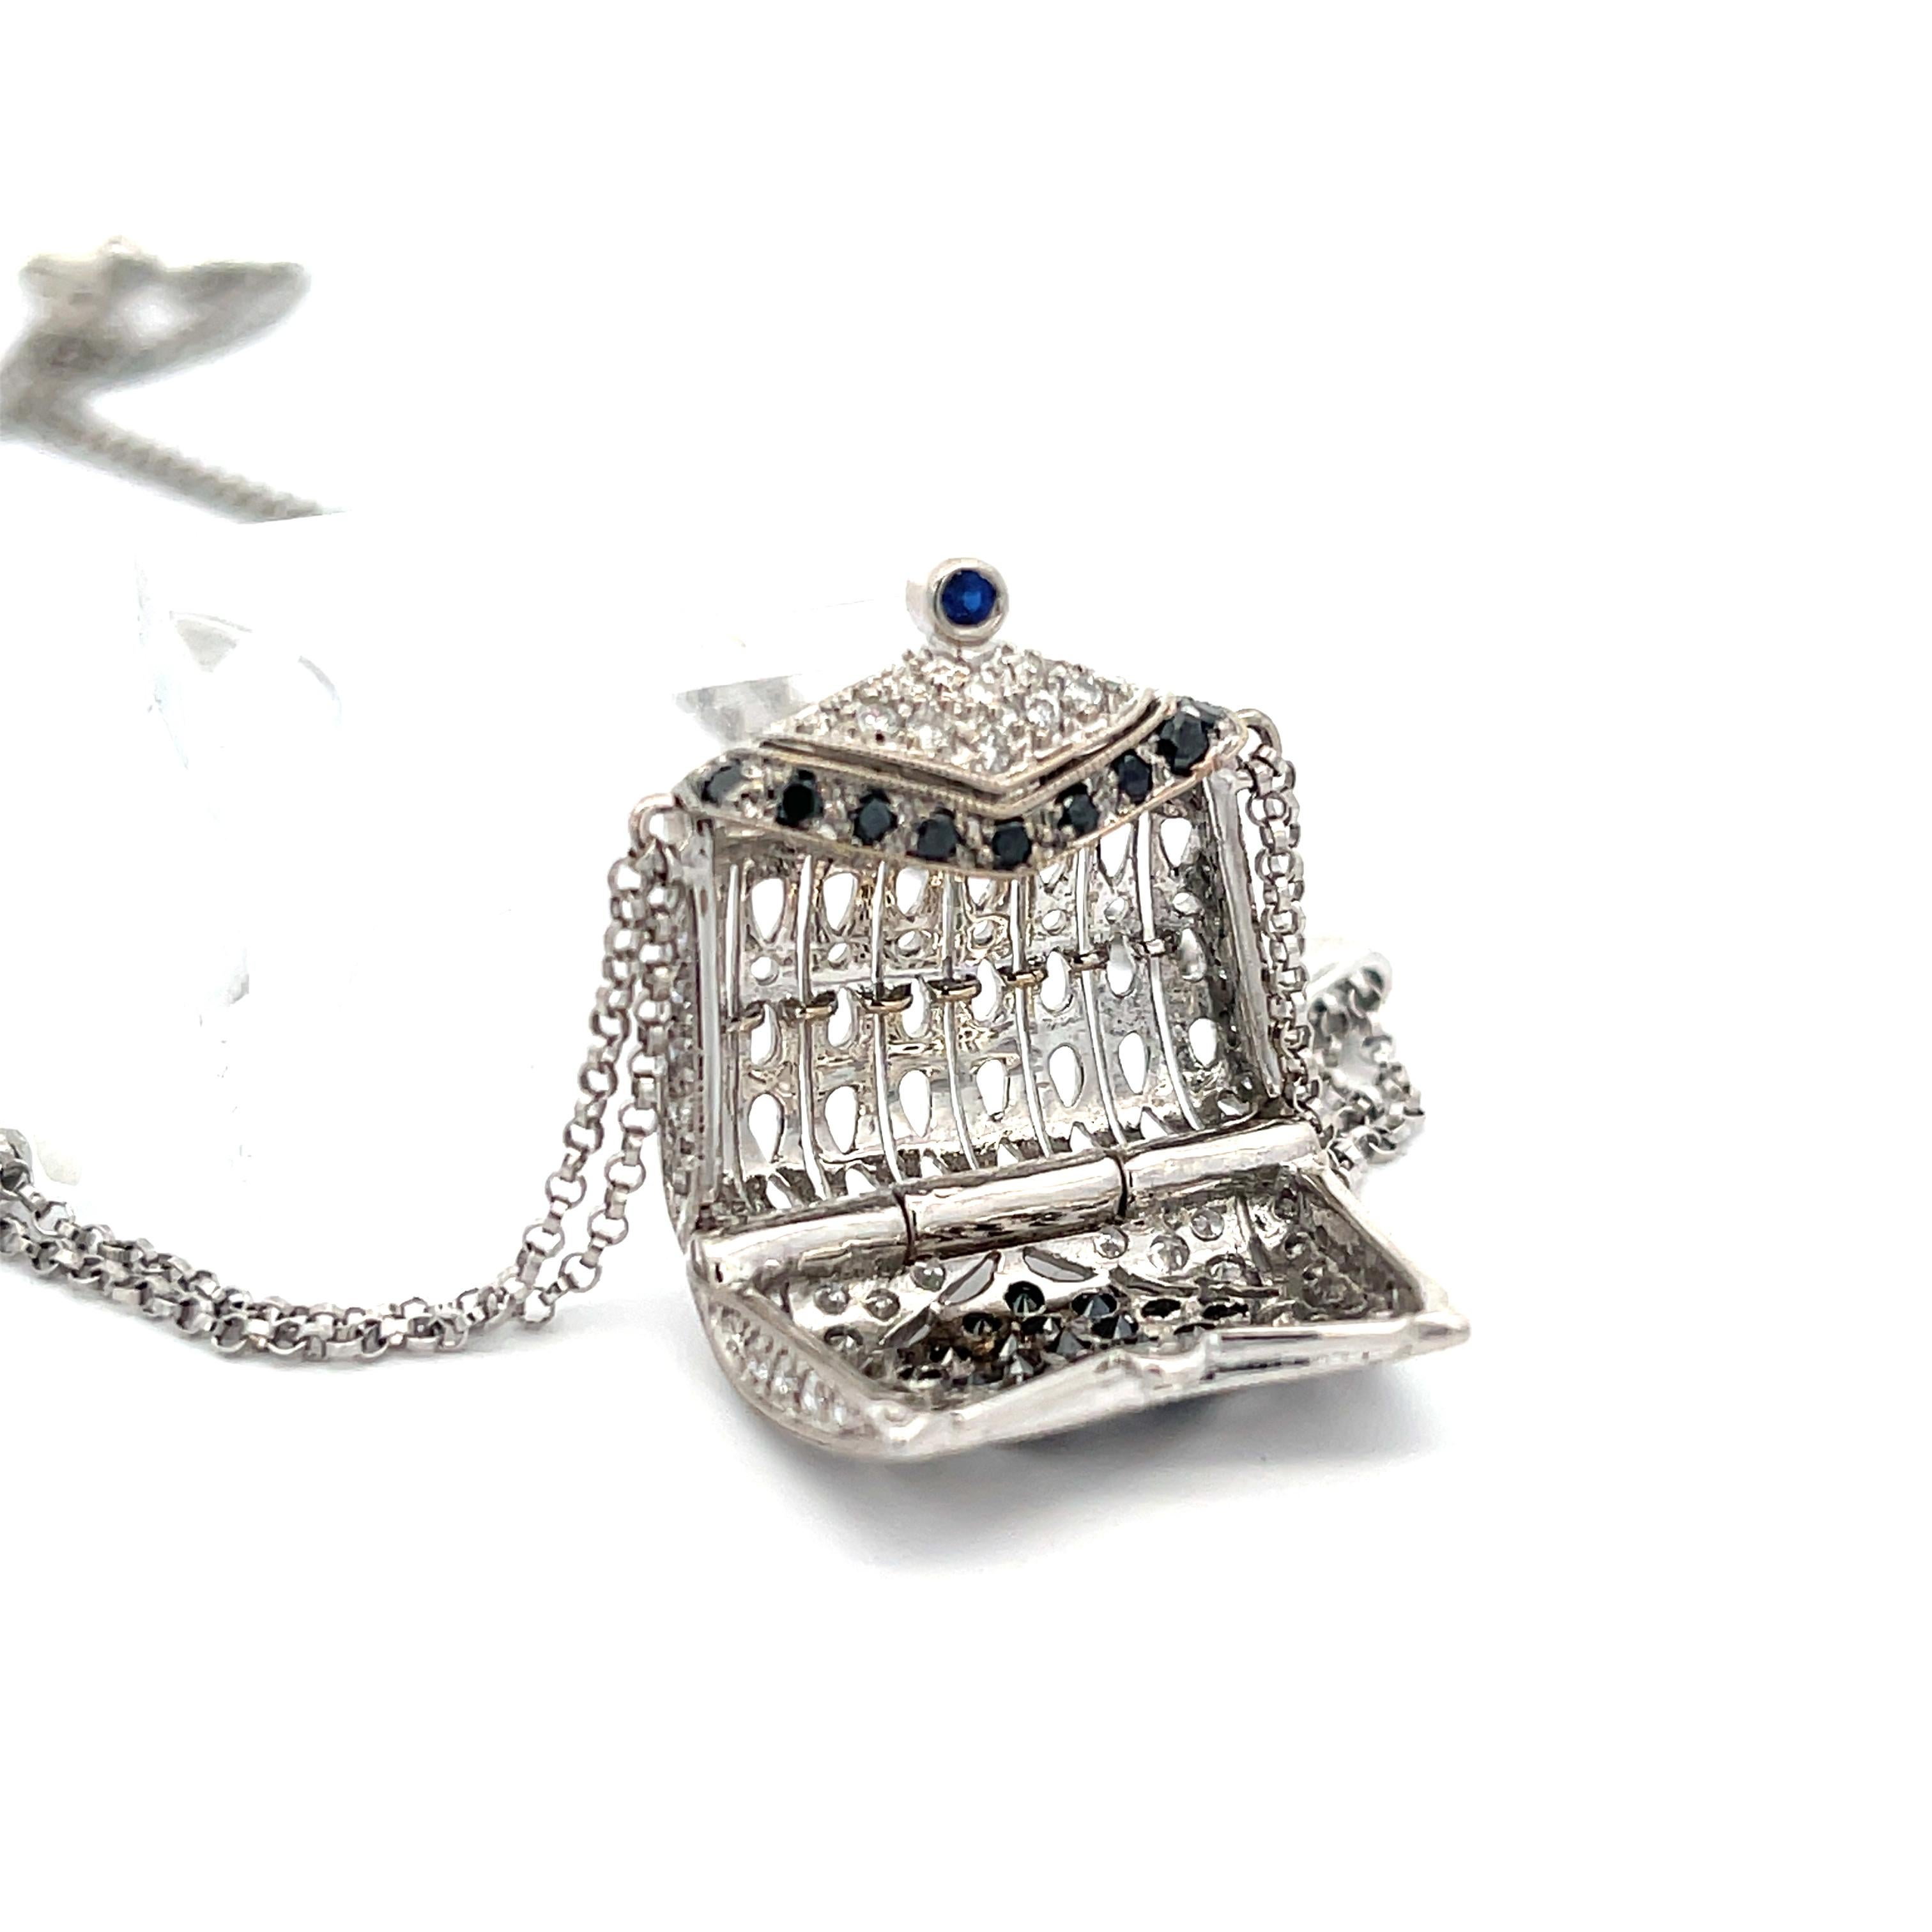 Purse Pendant Necklace in 18k White Gold. The purse pendant features black and white diamonds, on a 16